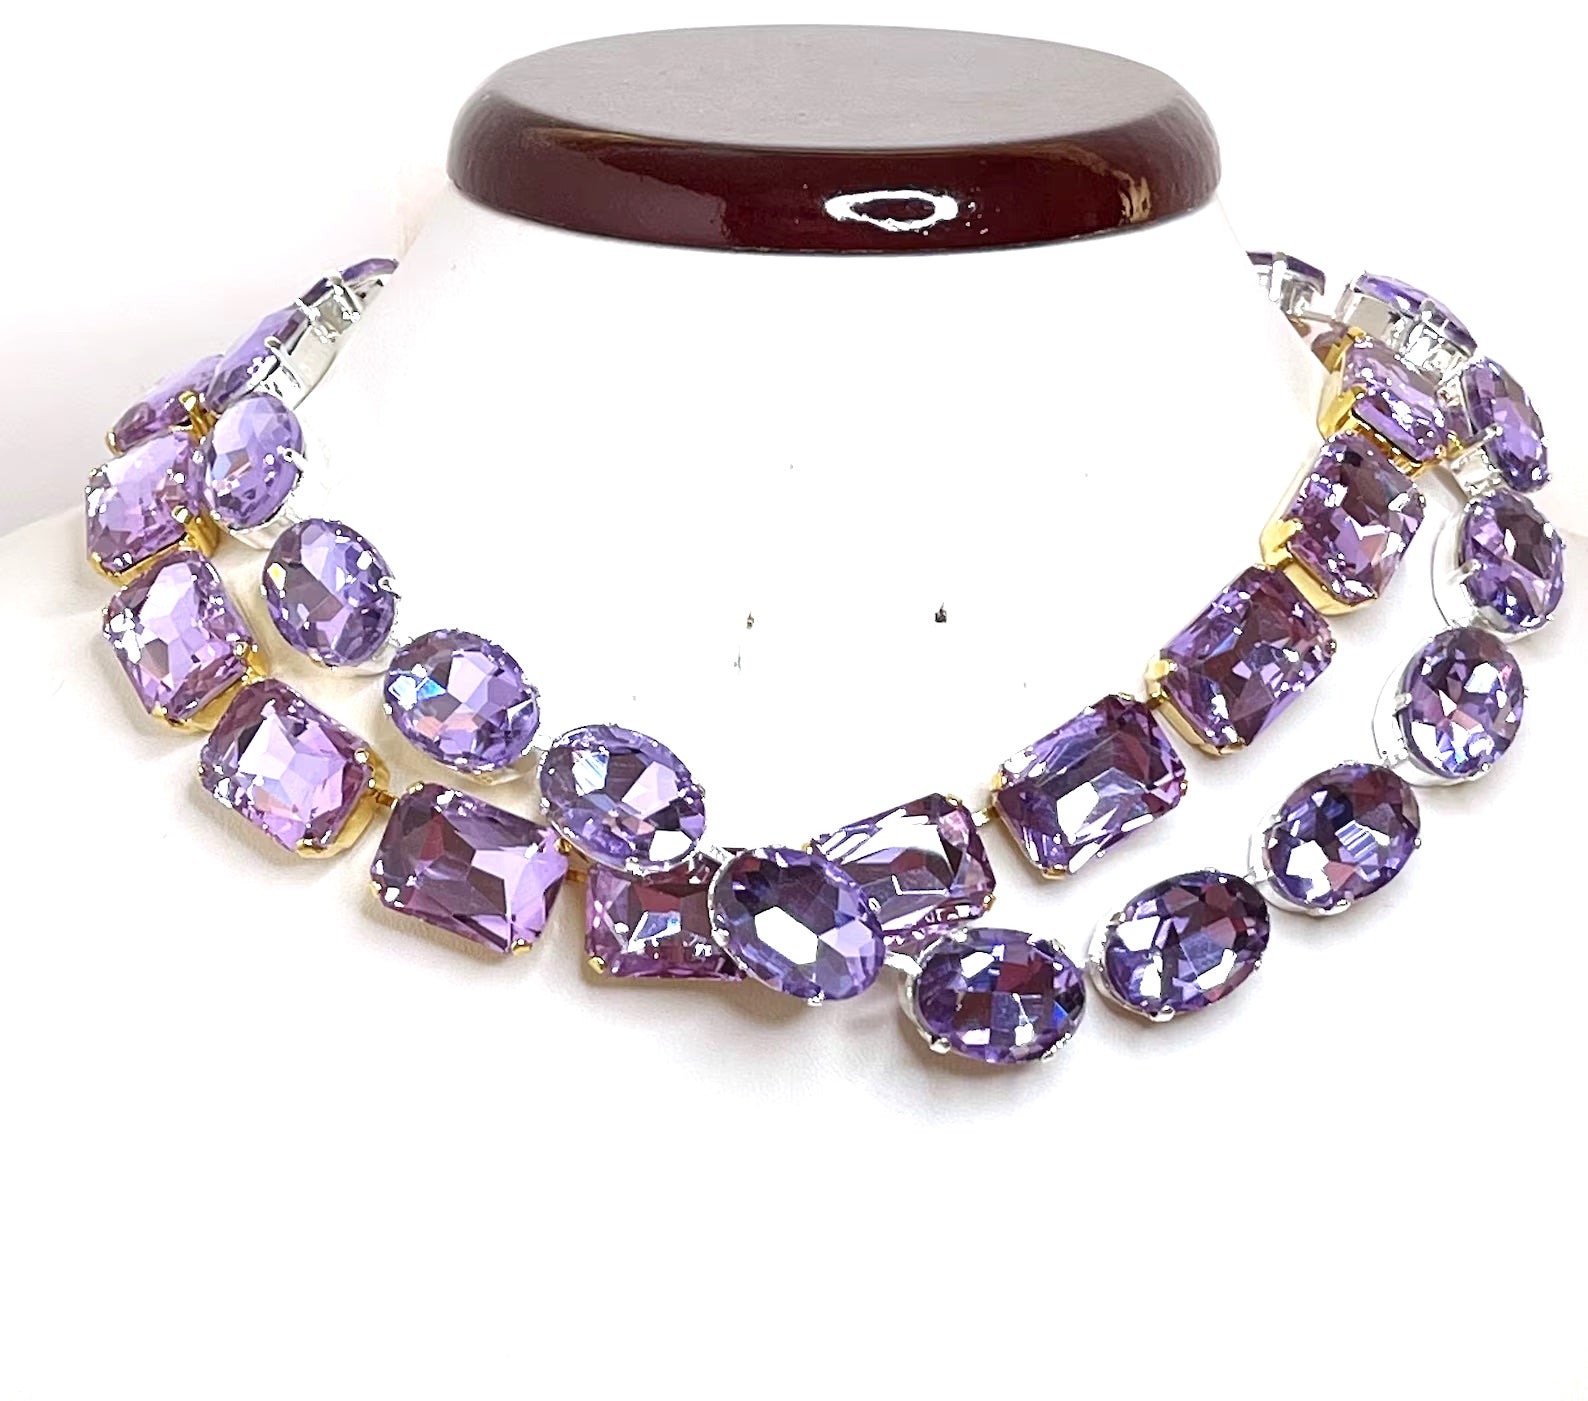 Violet Georgian Collet Crystal Chokers, Anna Wintour Style, Statement Necklace